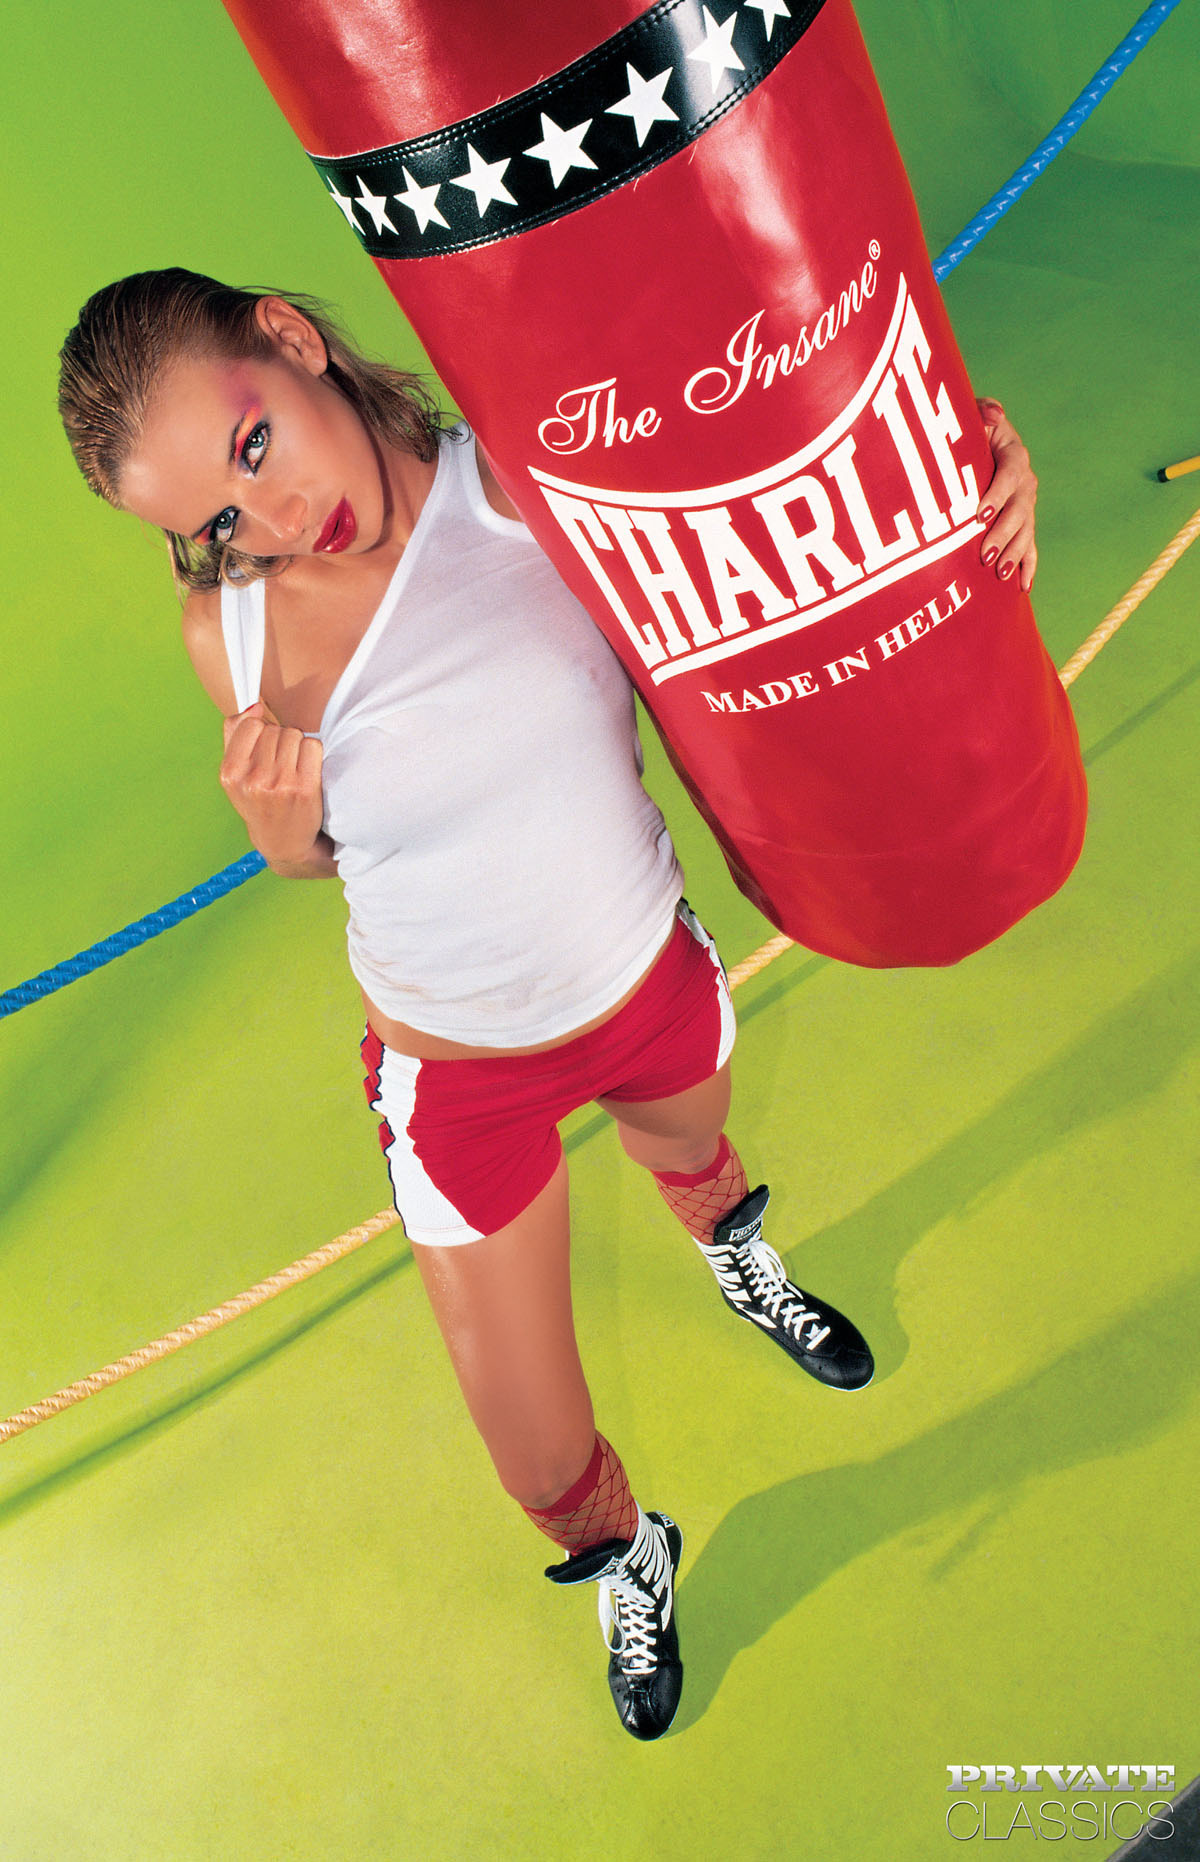 PHOTO | 00 291 - Christie Blanks, The Boxing Girl